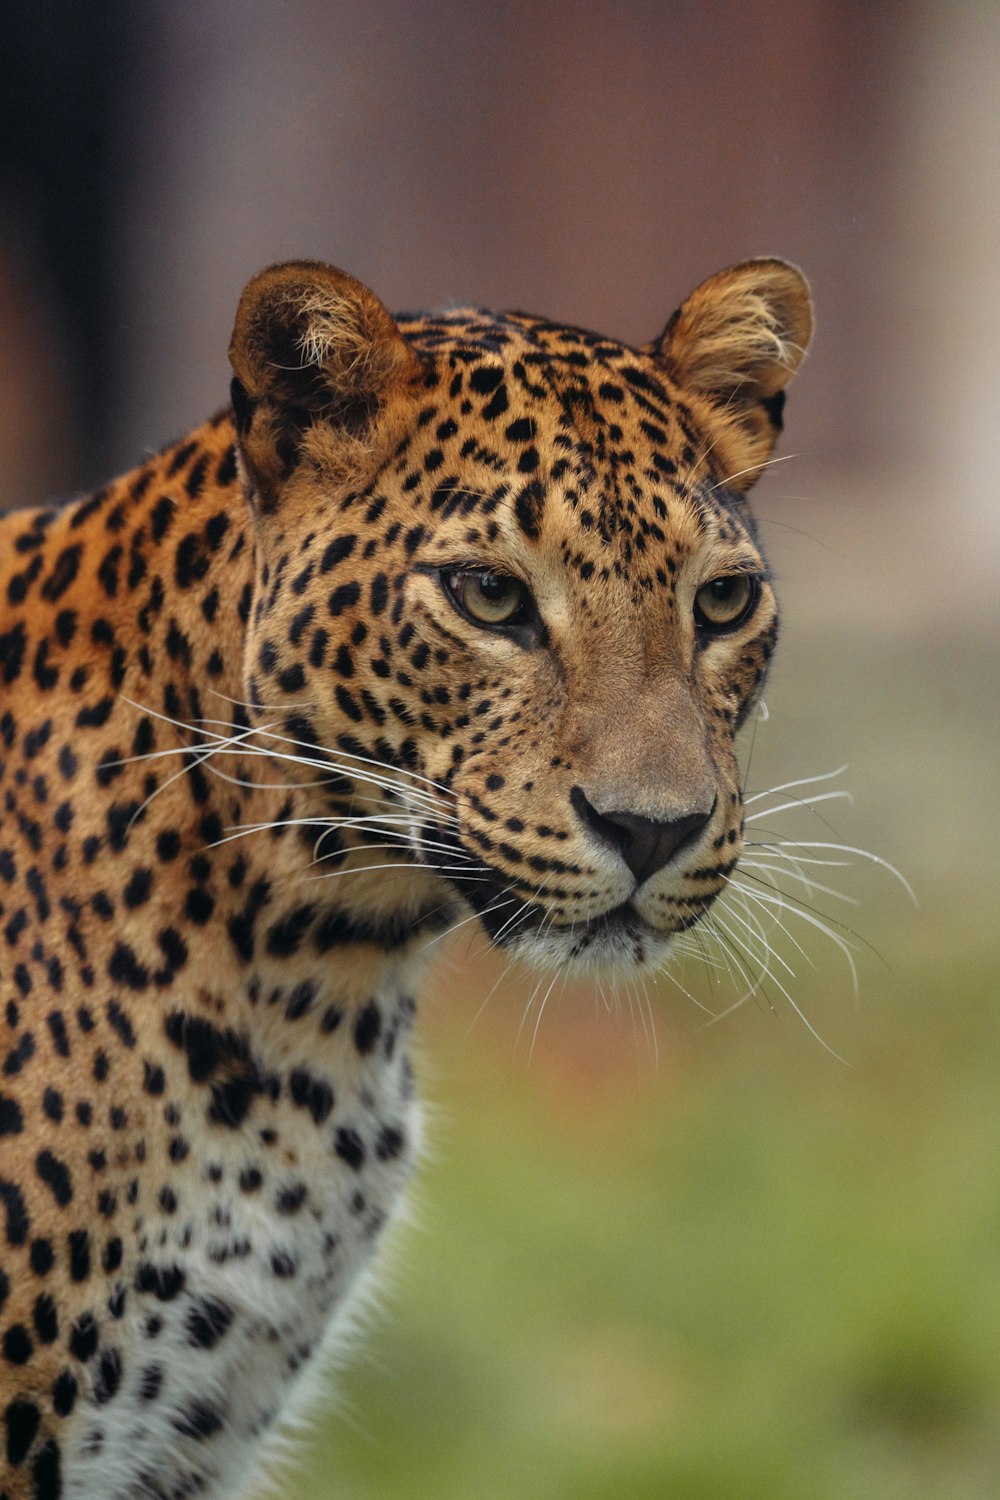 a close up of a leopard with a blurry background